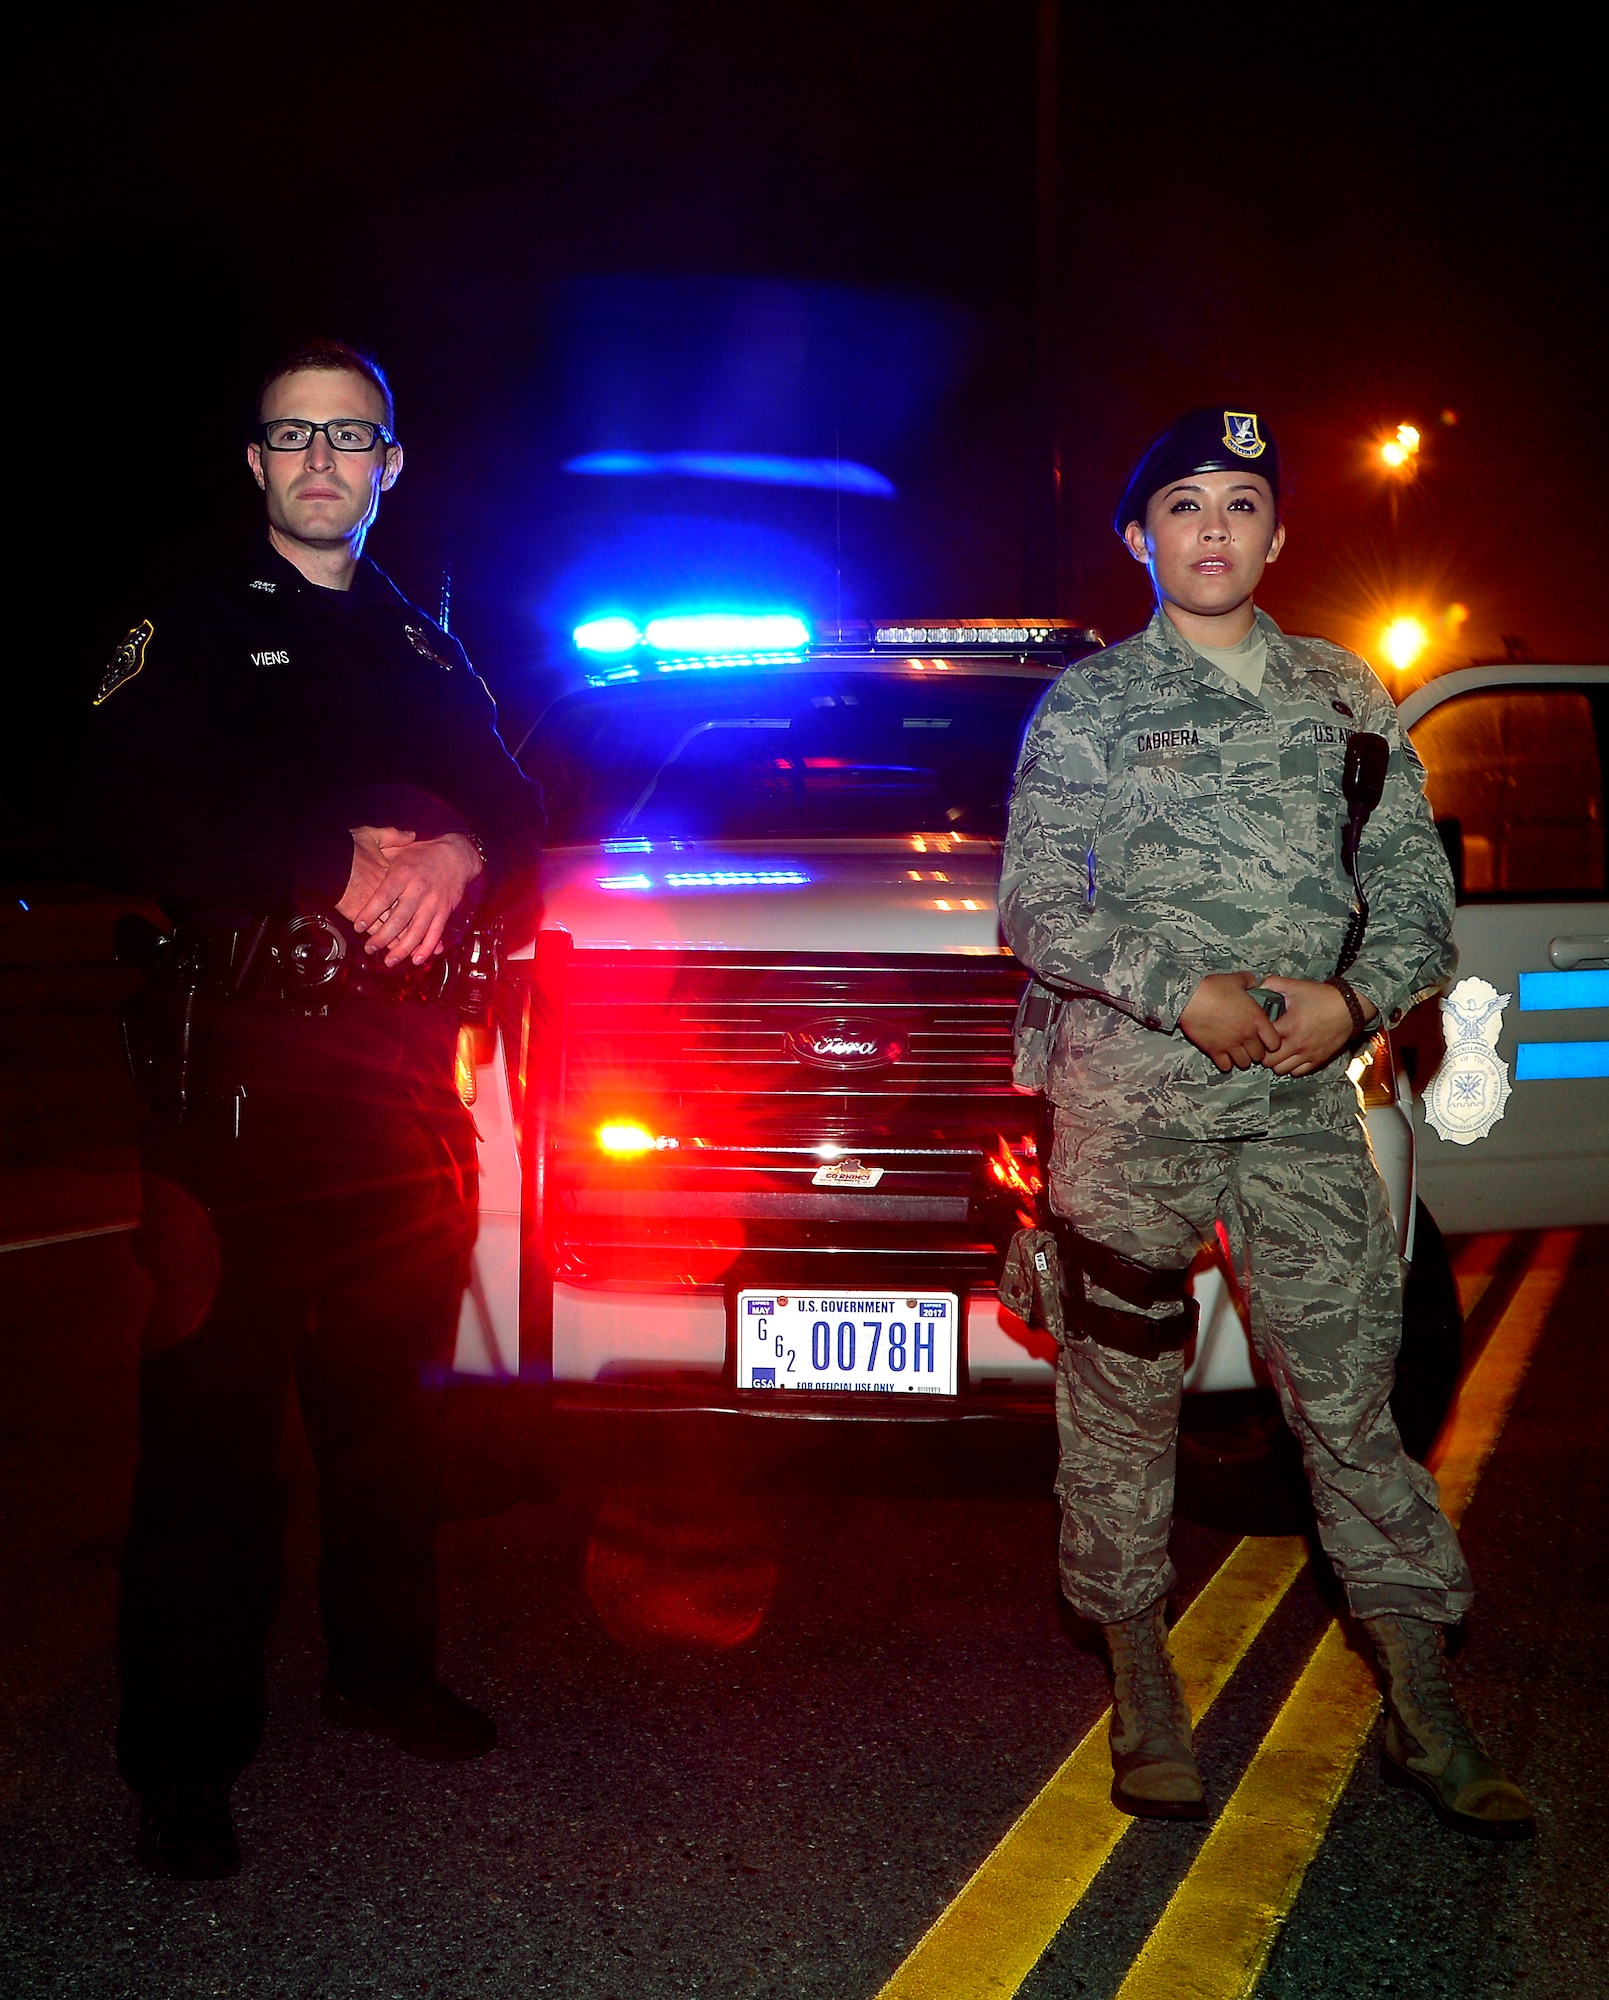 Department of Defense police officer Justin Viens (left) and Airman 1st Class Amanda Cabrera from the 436th Security Forces Squadron pose for a photo in front of their patrol vehicle may 6th, 2013, at Dover Air Force Base, Delaware. The 436th SFS will be participating in the upcoming events that support National Police Week May 11th 2013. (U.S. Air Force photo/David S. Tucker)